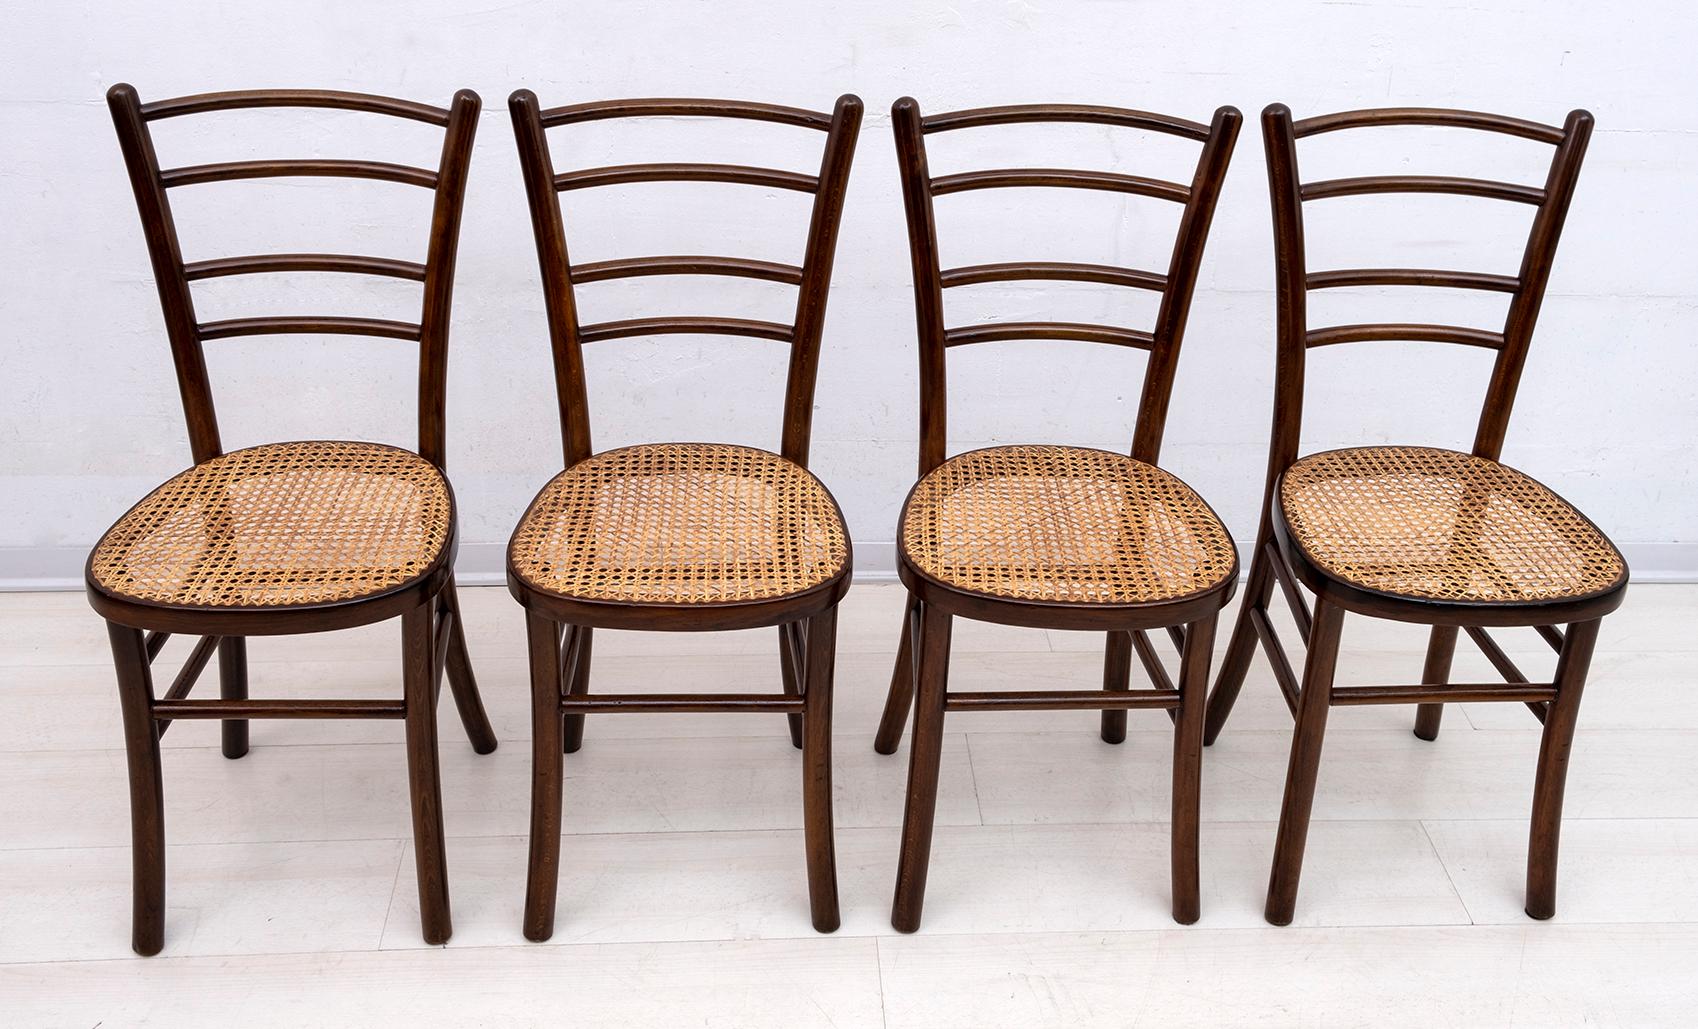 These chairs were produced by the Volpe company, leader in Italy in the curved beech technique, a technique invented by Thonet. The Volpe company was born in Italy in Friuli in 1894.